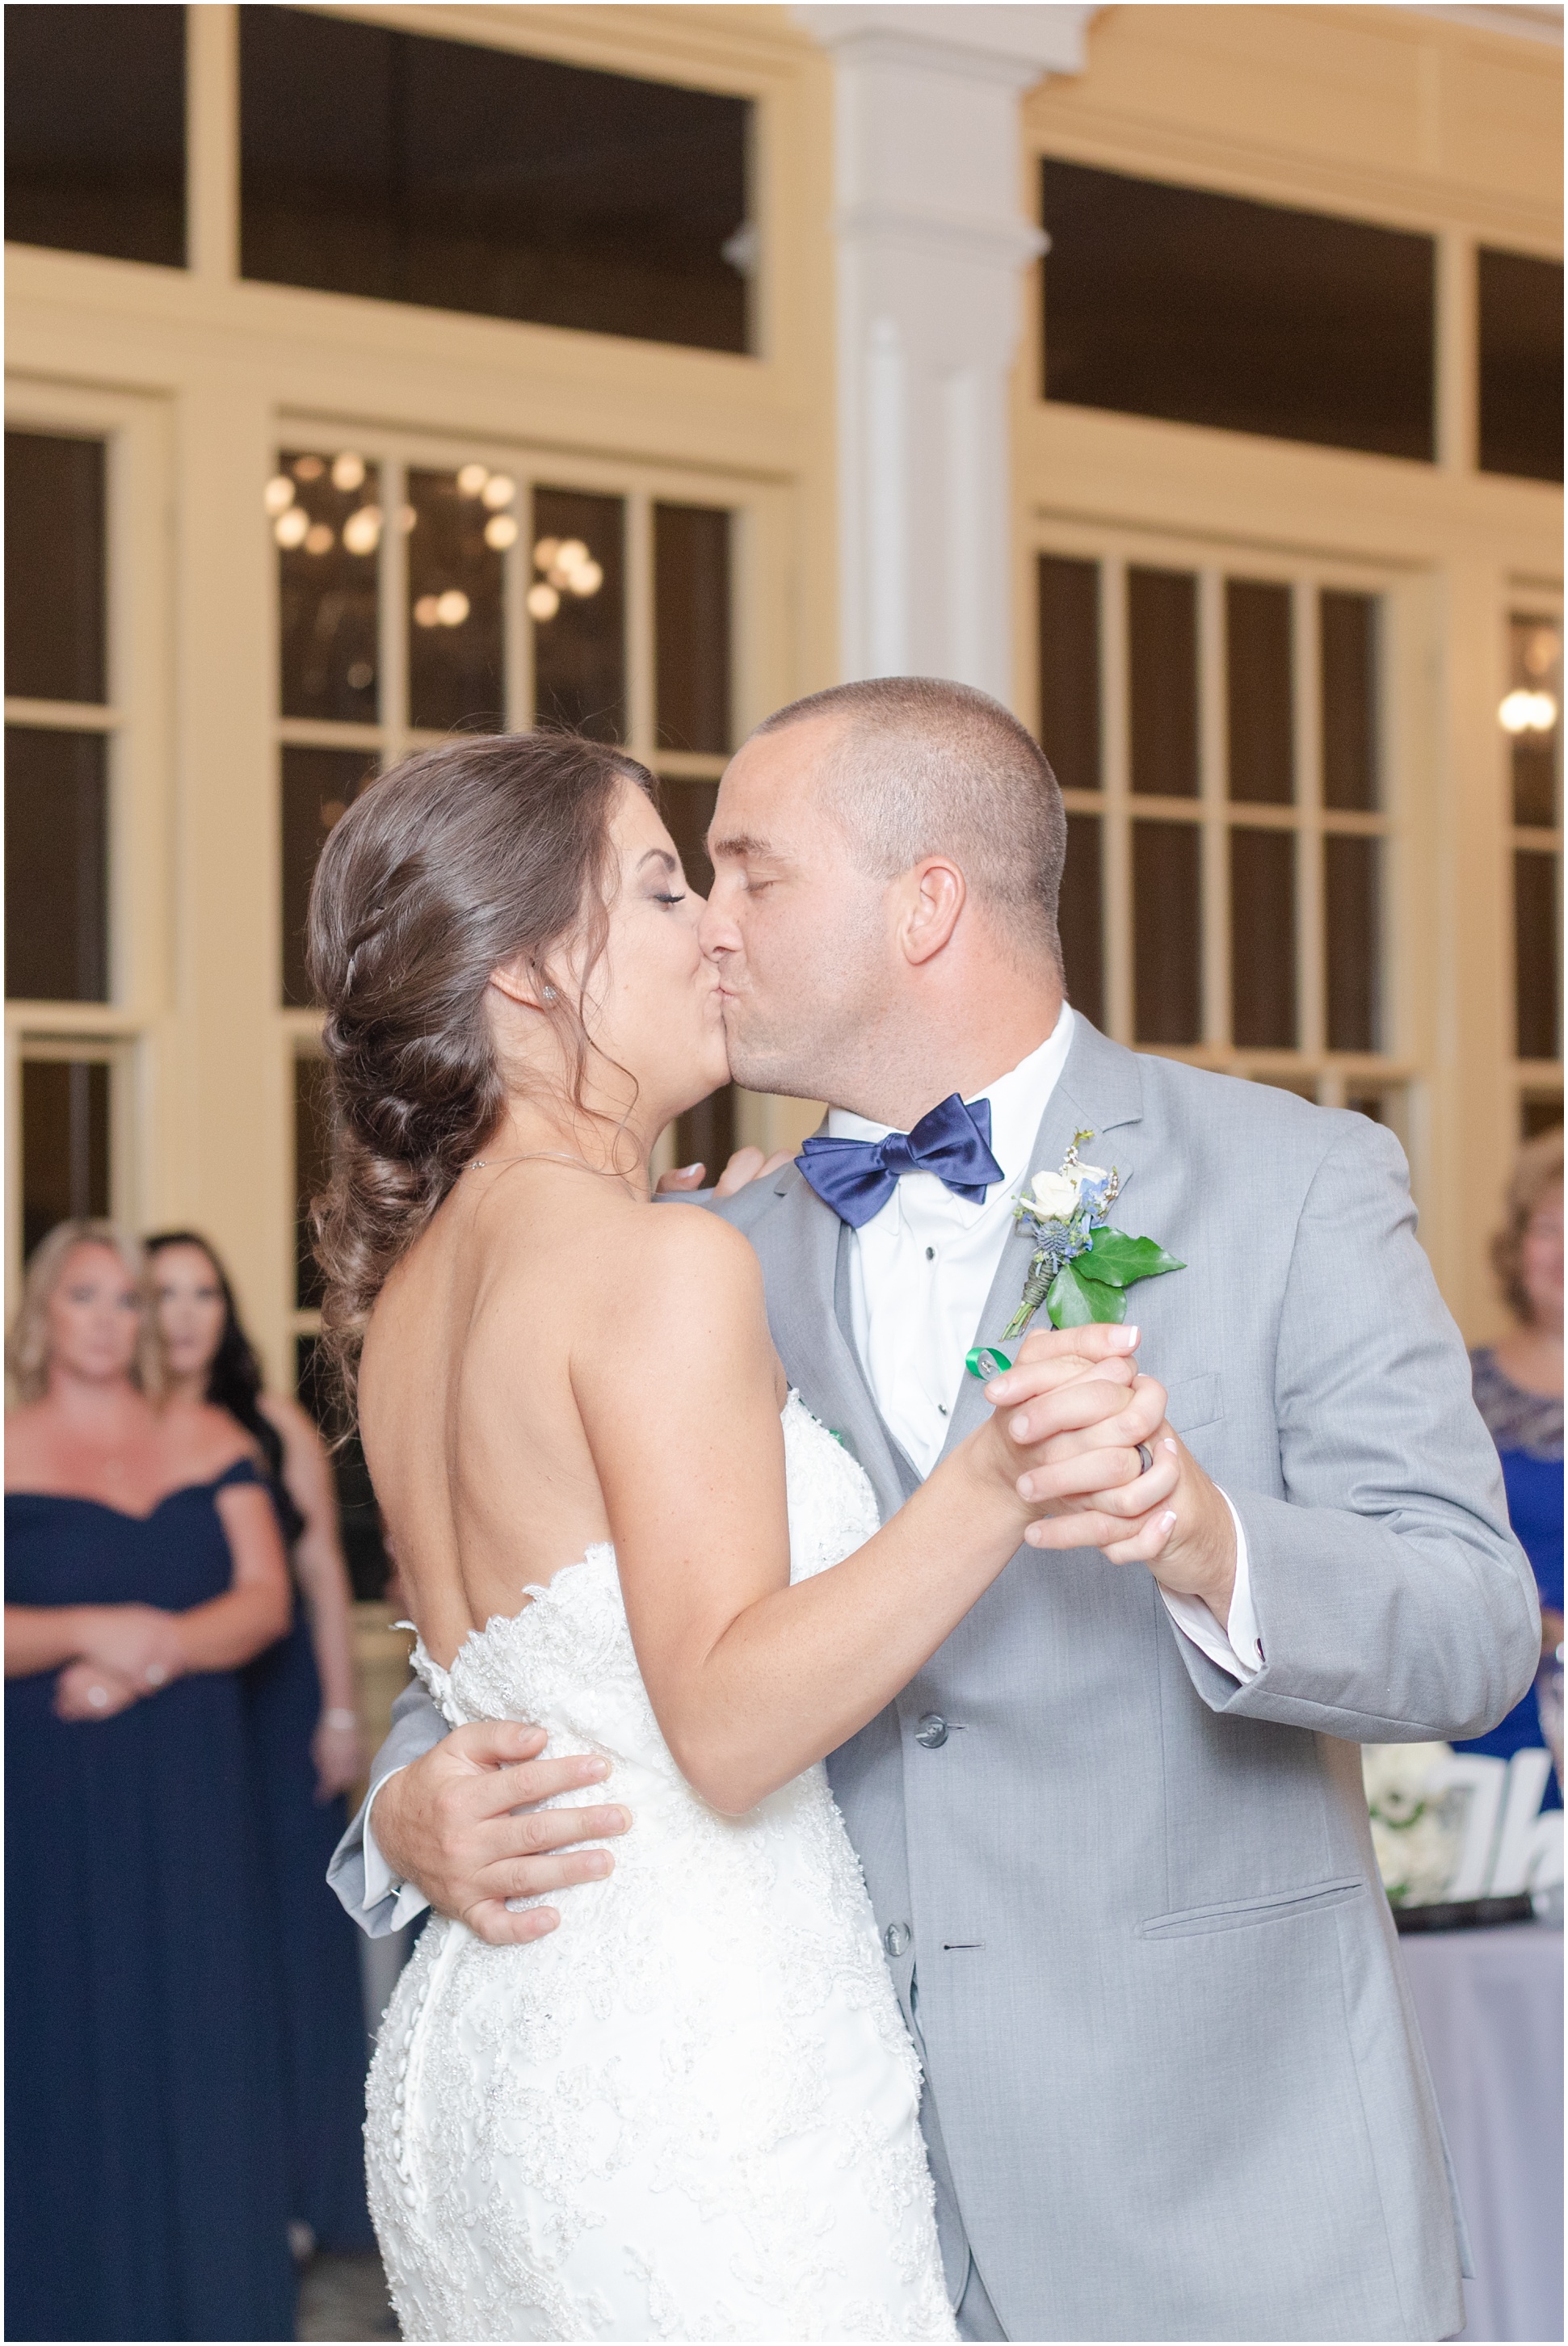 Bride and groom kissing as they ended their first dance on their wedding day at the MD Zoo